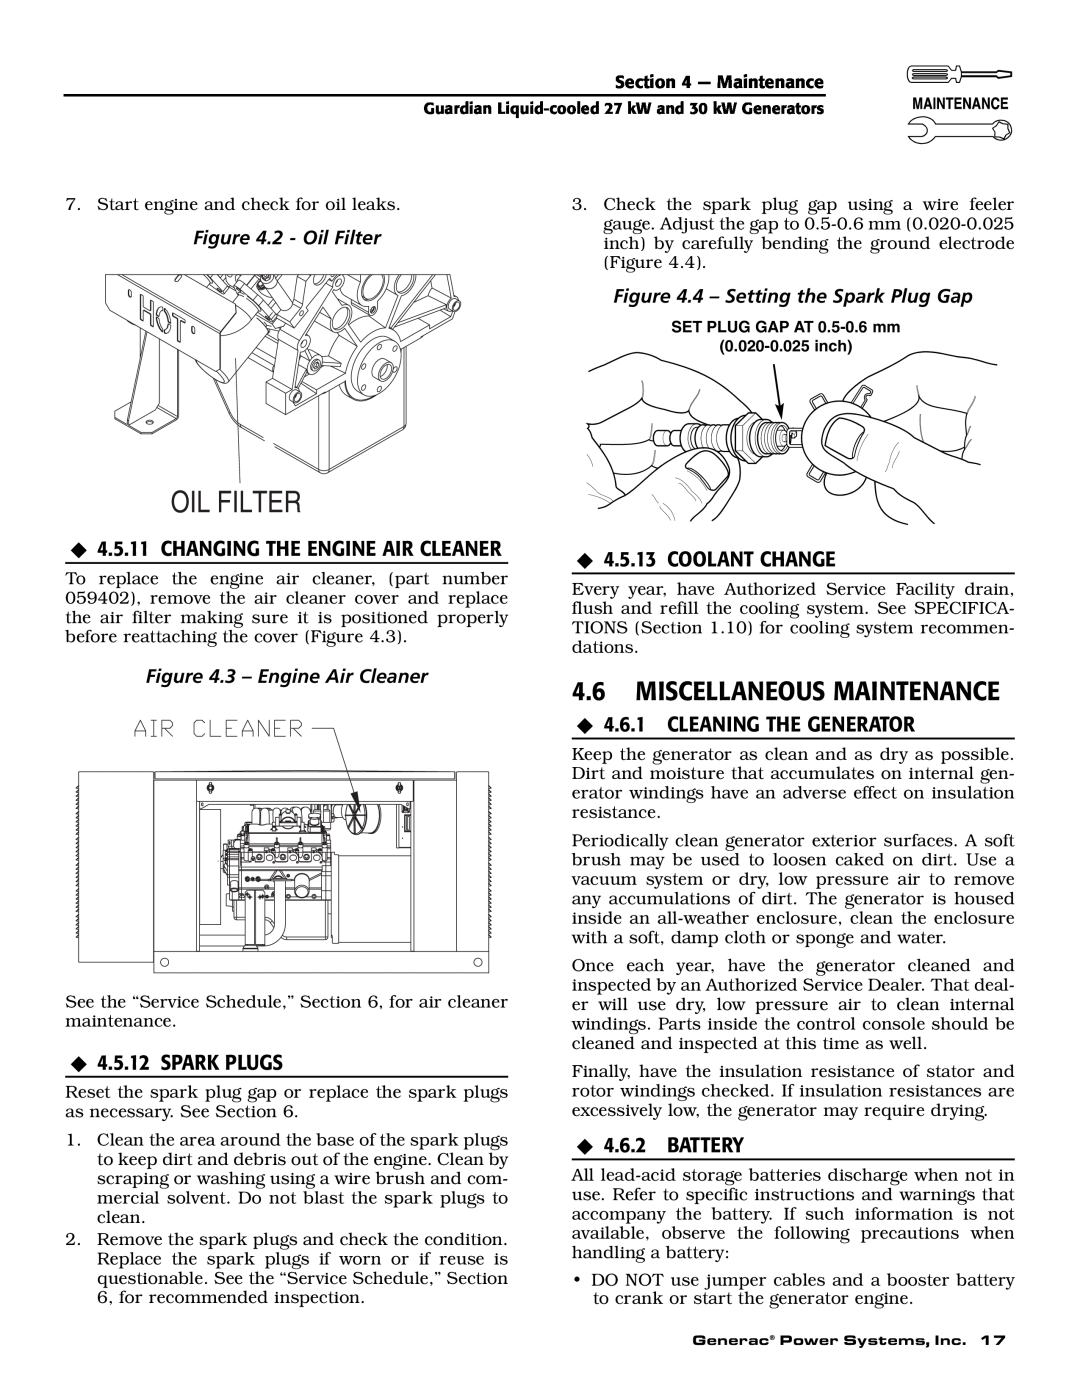 Generac Power Systems 004988-1 4.6MISCELLANEOUS MAINTENANCE, ‹4.5.11 CHANGING THE ENGINE AIR CLEANER, ‹4.5.12 SPARK PLUGS 